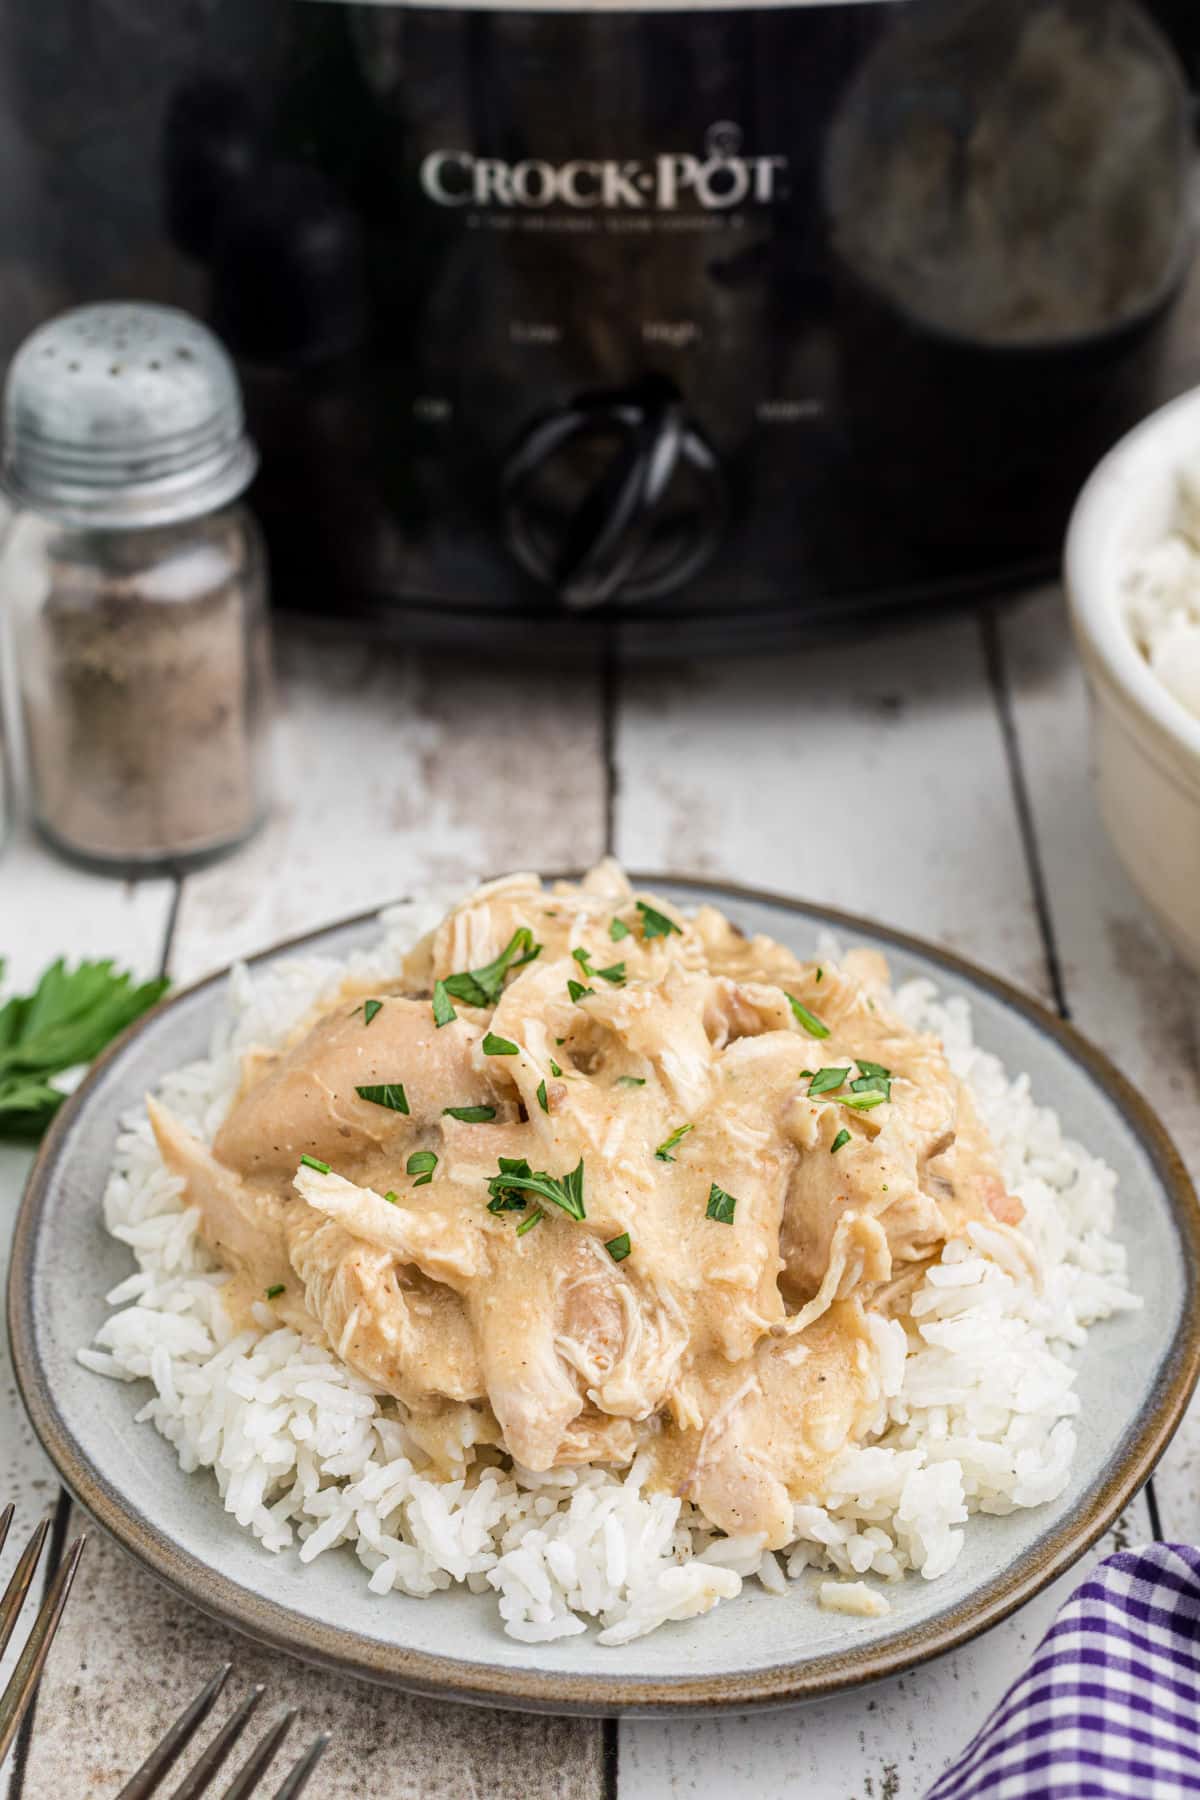 A dished up plate of chicken and gravy on rice in front of a crock pot.